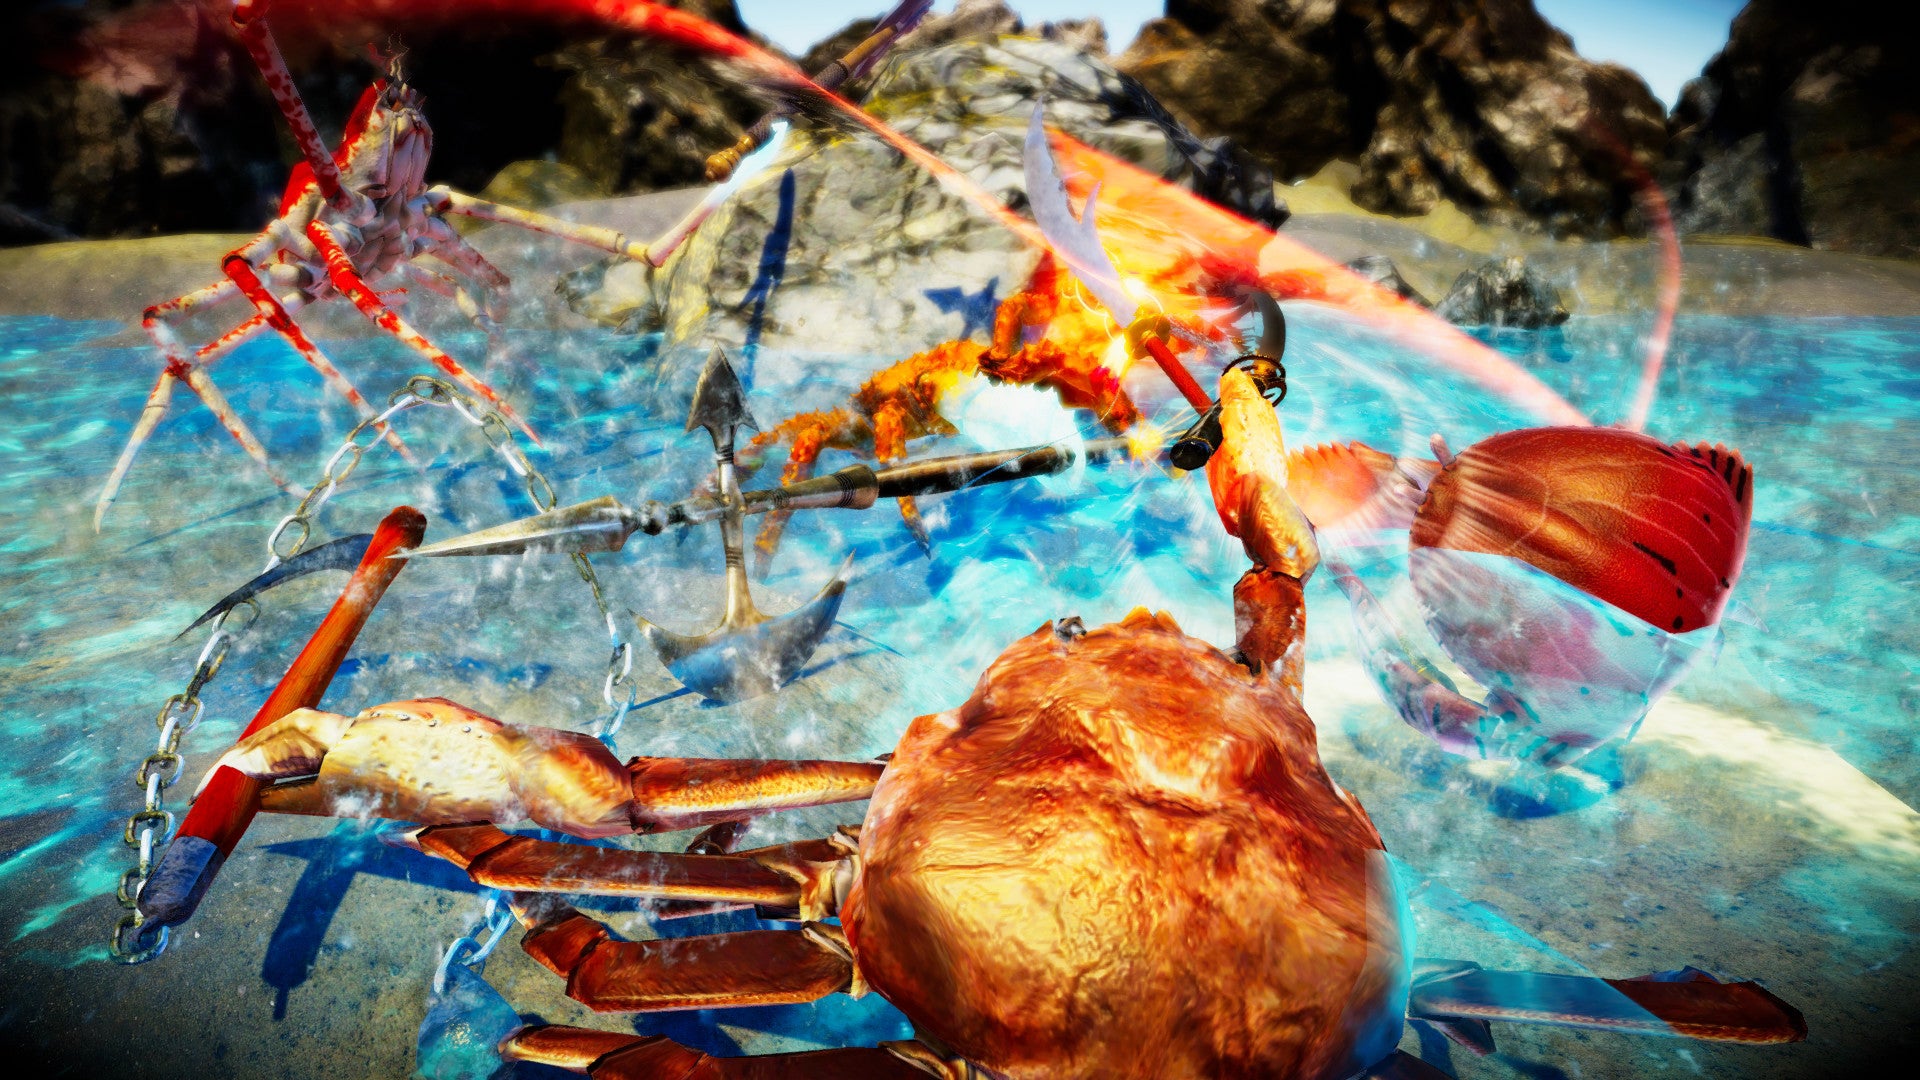 Heavily armed crustaceans battle in a Fight Crab screenshot.